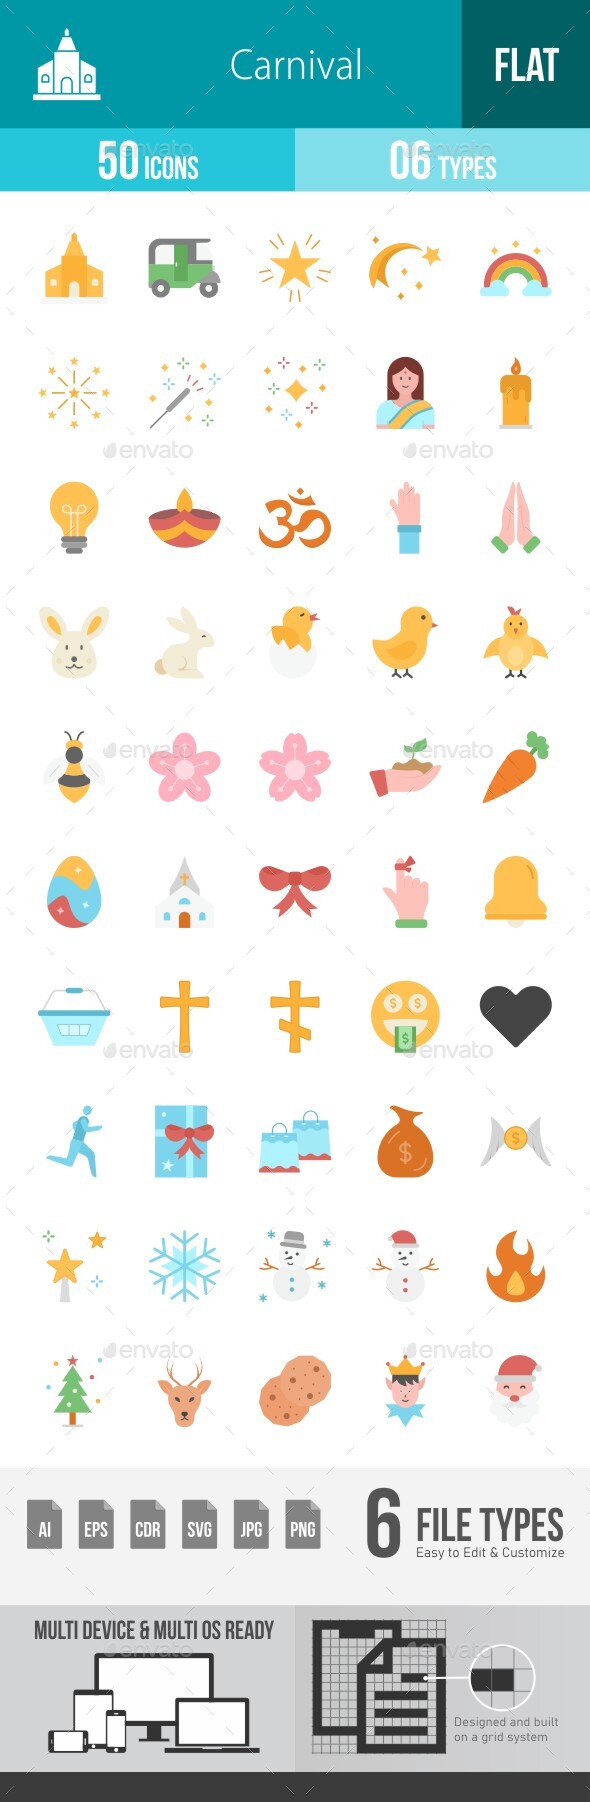 [DOWNLOAD]Carnival Flat Multicolor Icons